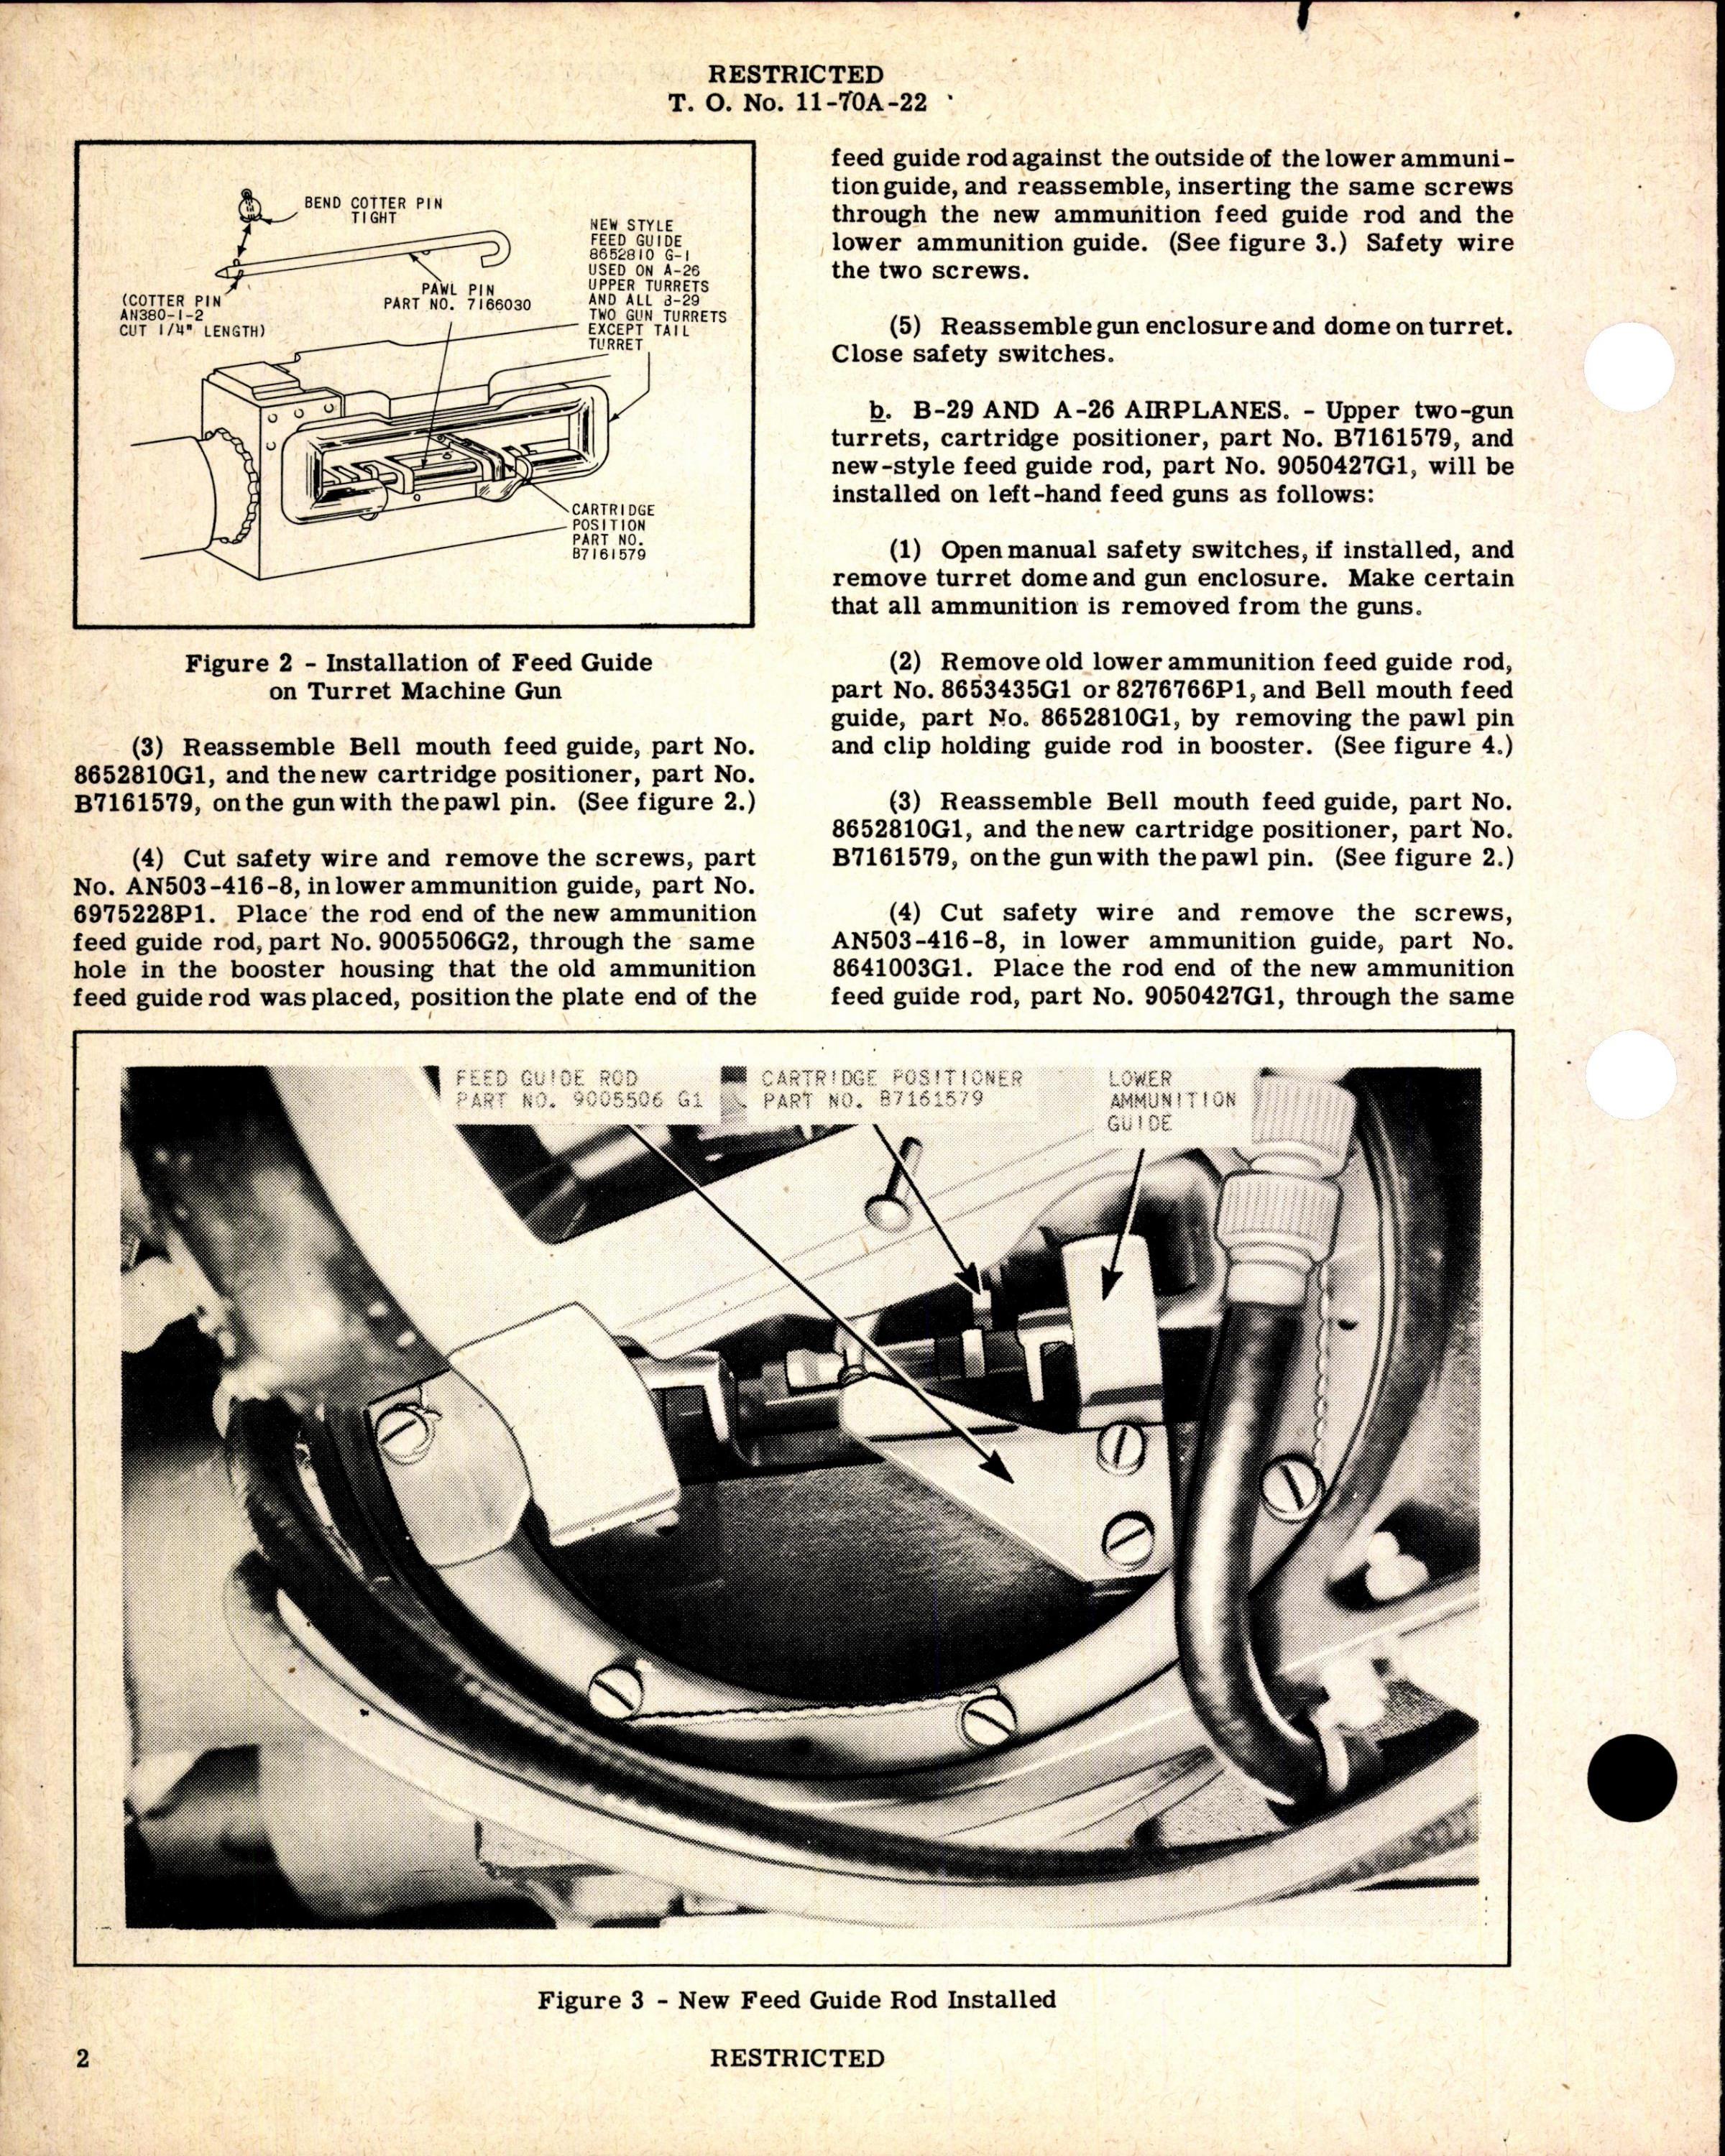 Sample page 2 from AirCorps Library document: Installation of Cartridge Positioners, Replacement of Feed Guide Rods